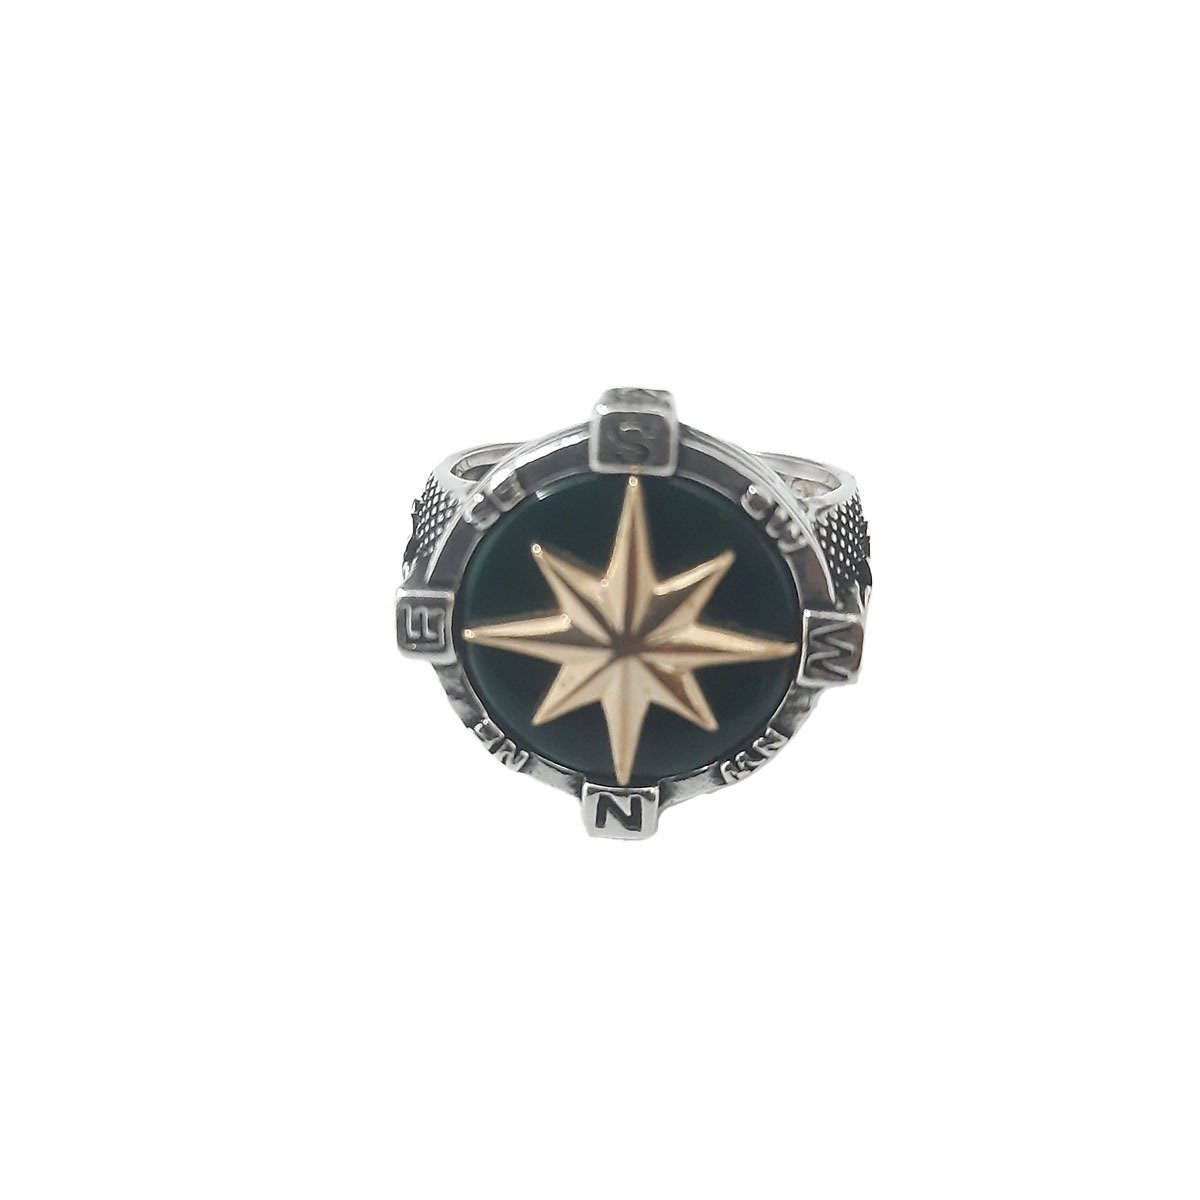 GREEN COMPASS RING WITH ANCHOR FIGURE